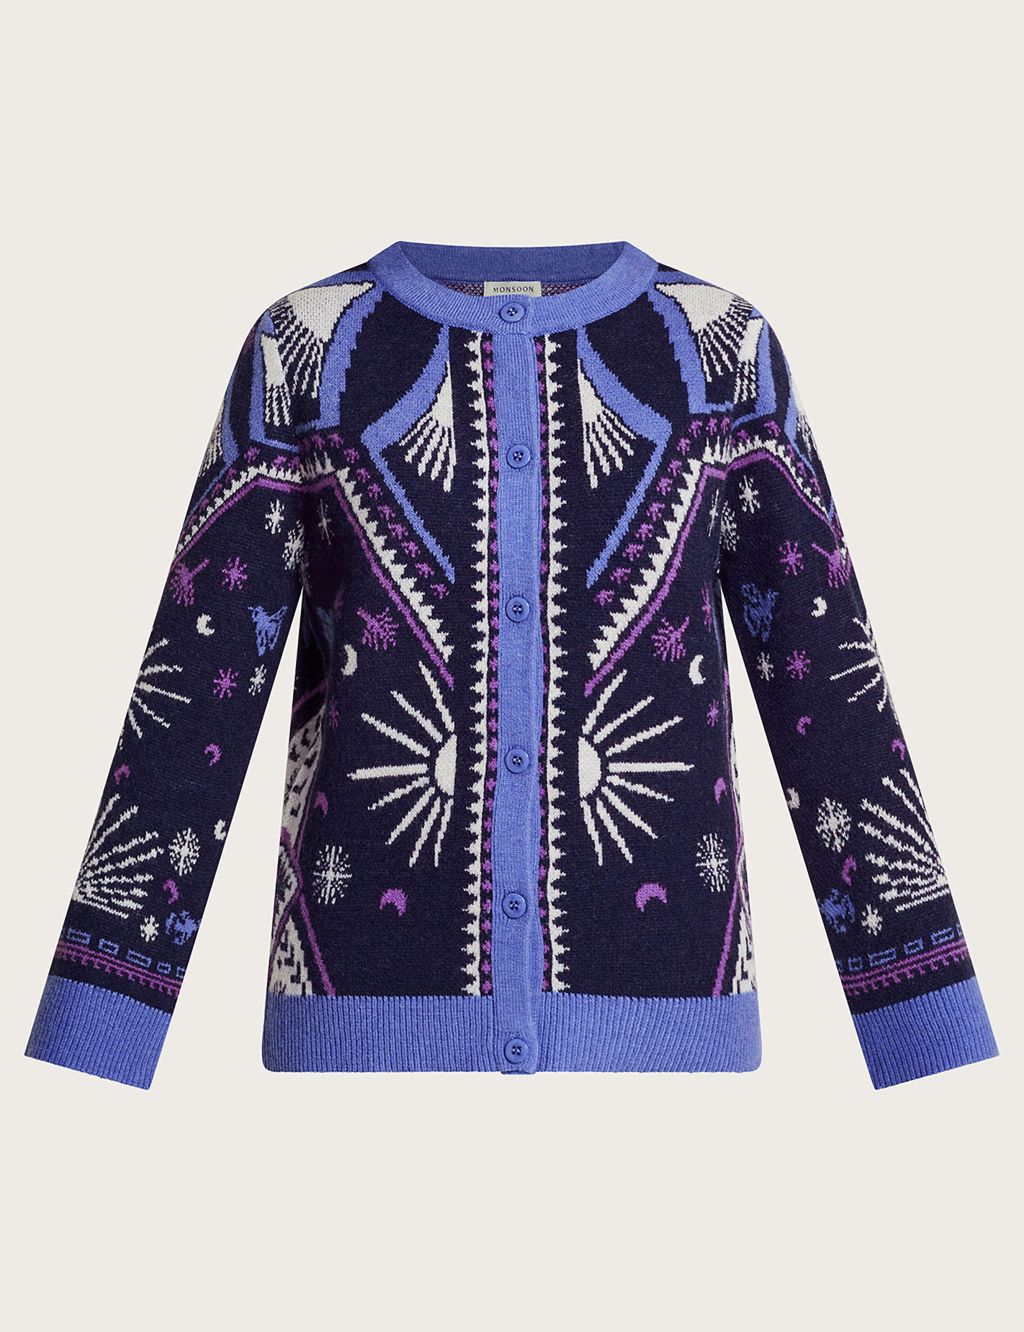 Sun and Moon Patterned Crew Neck Cardigan image 2